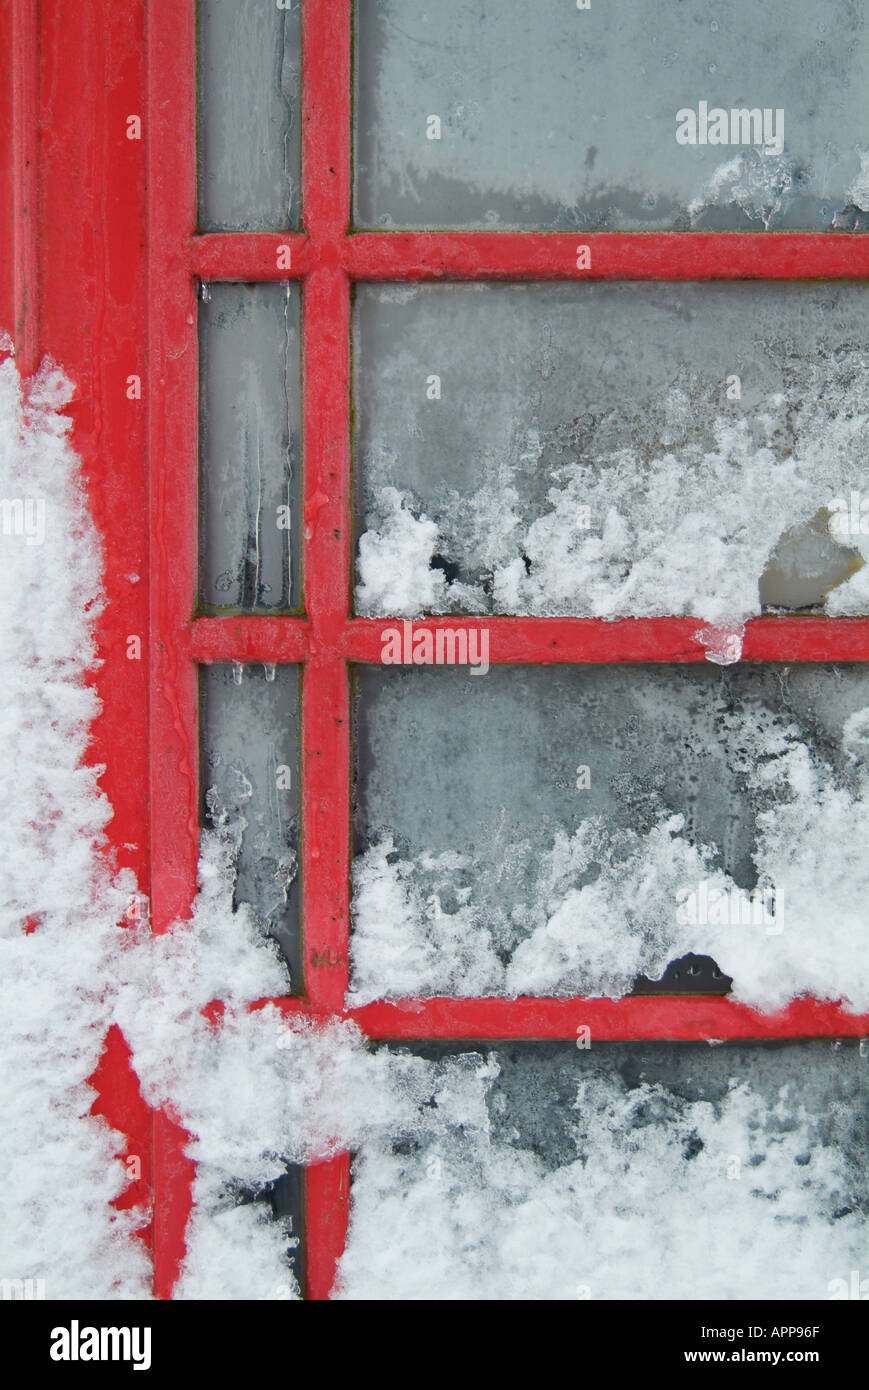 Snow covered door and glass panes of traditional red telephone box in derbyshire peak district England UK GB EU Europe Stock Photo